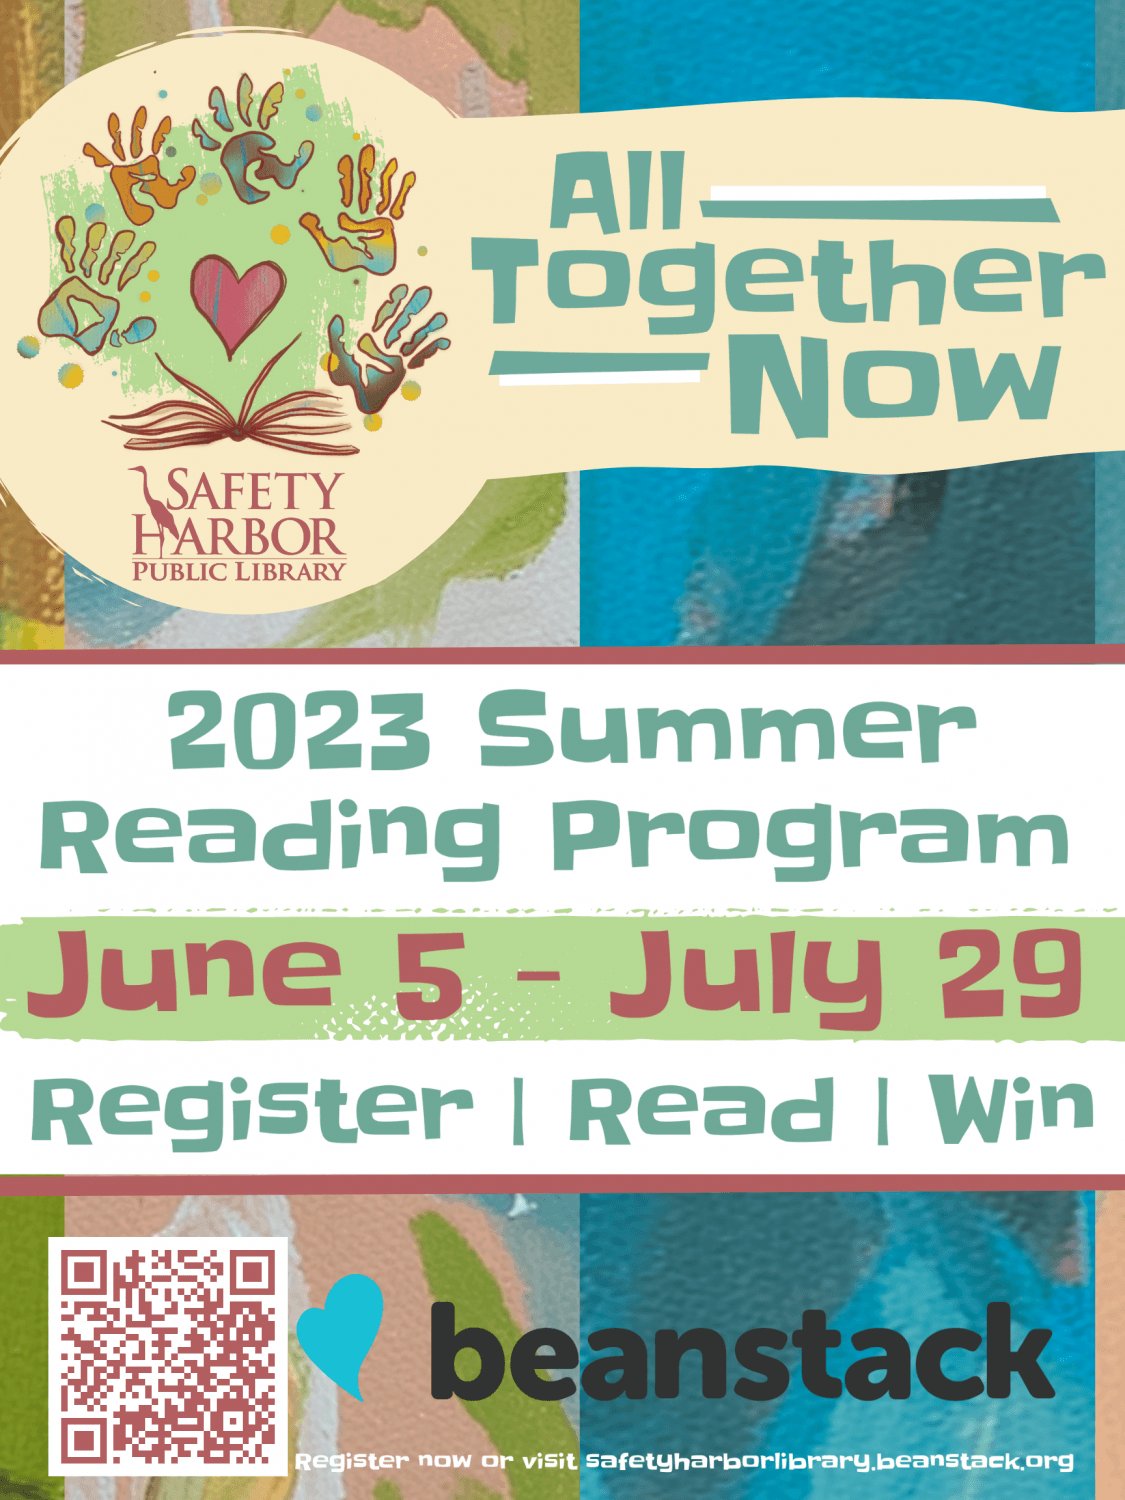 All Together Now - Safety Harbor Library's Summer Reading Programs